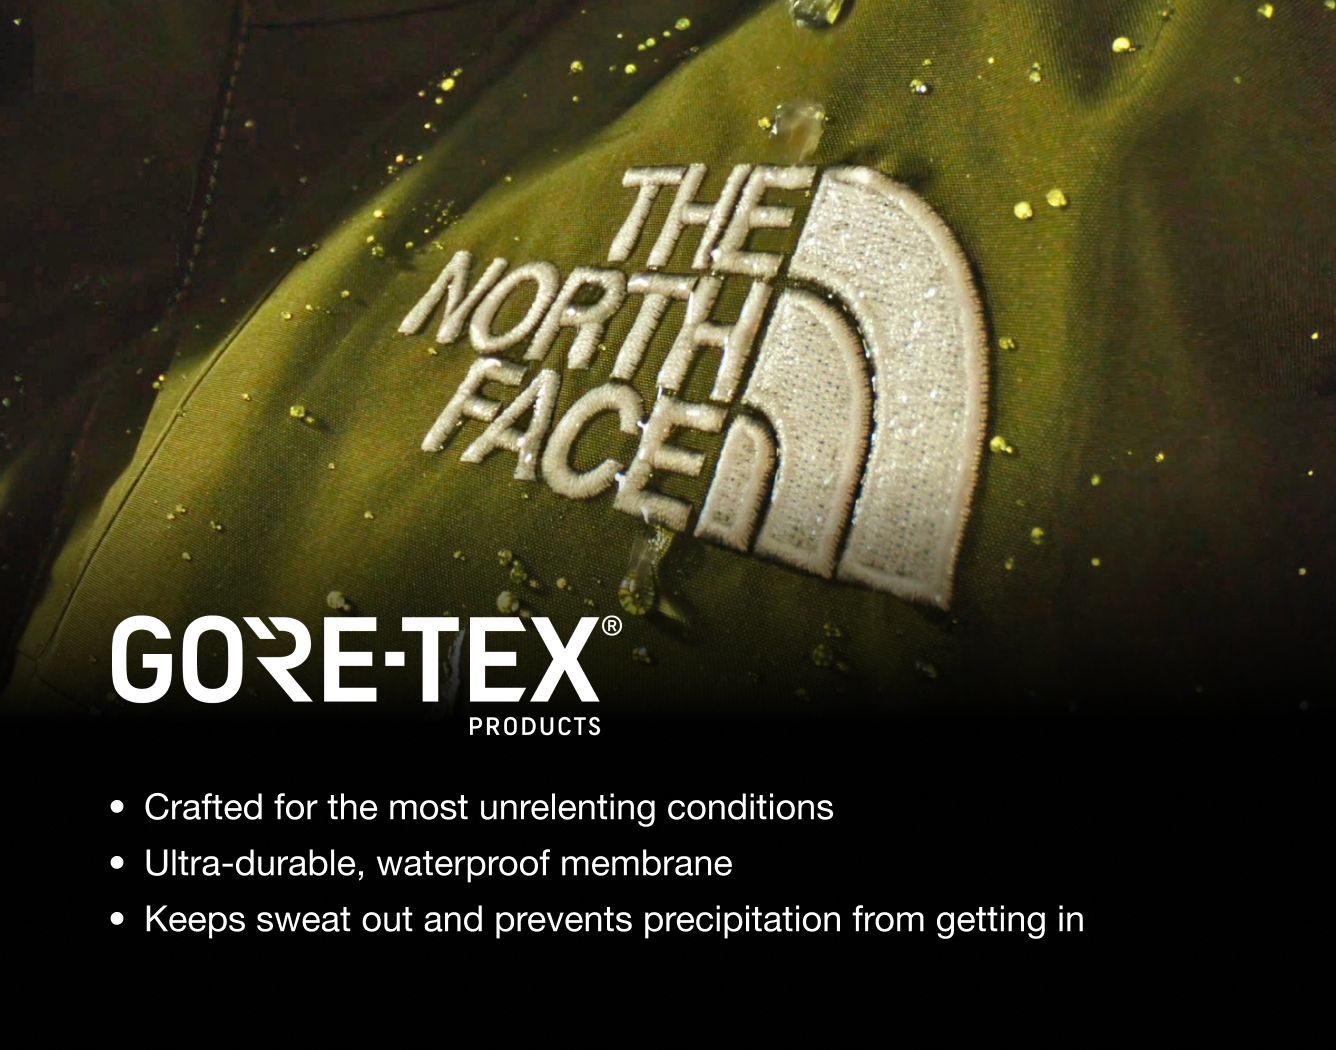 An up- close shot of The North Face logo on the Mountain Jacket. Text: "Crafted for the most unrelenting conditions - Ultra-durable, waterproof membrane - Keeps sweat out and prevents precipitation from getting in"